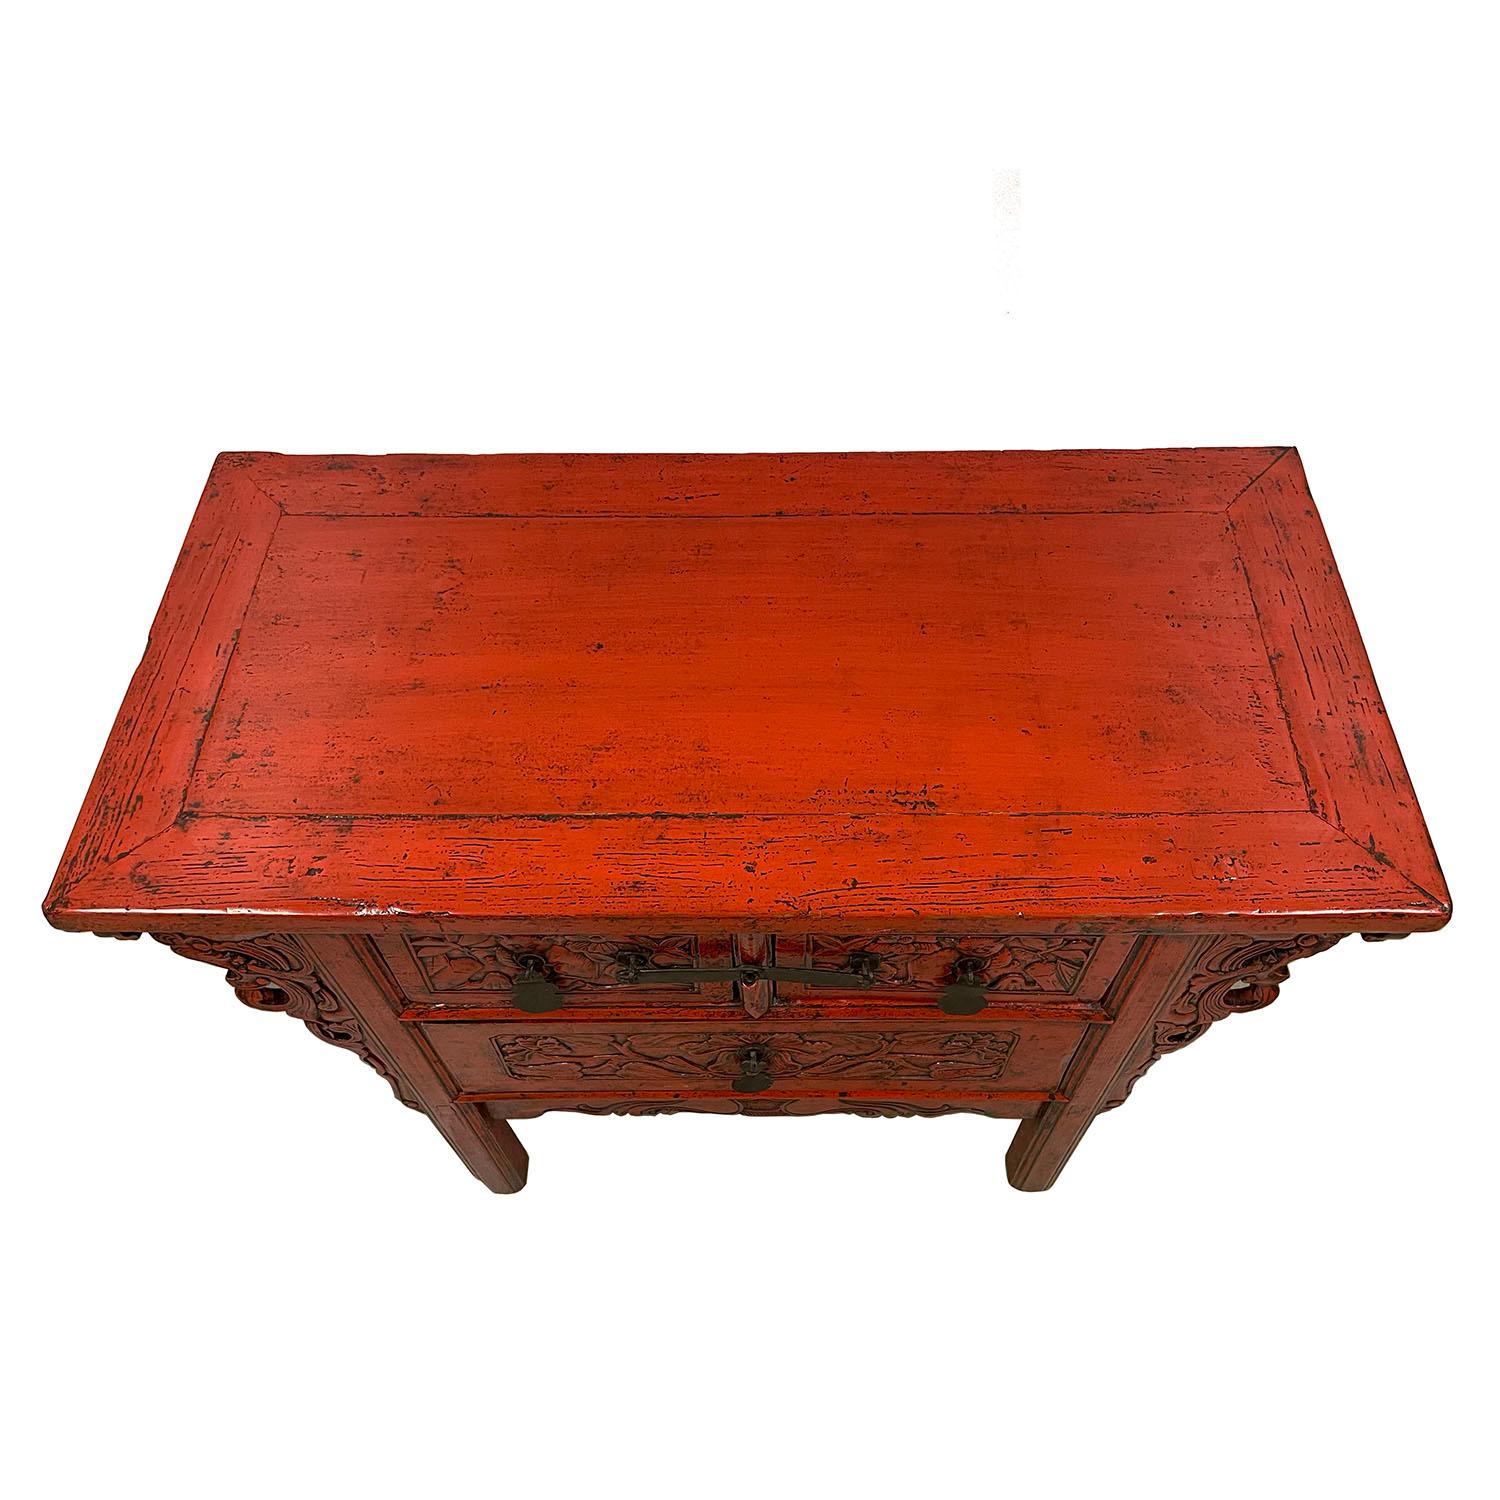 19th Century Antique Chinese Carved Red Lacquer Console Table / Sideboard For Sale 1